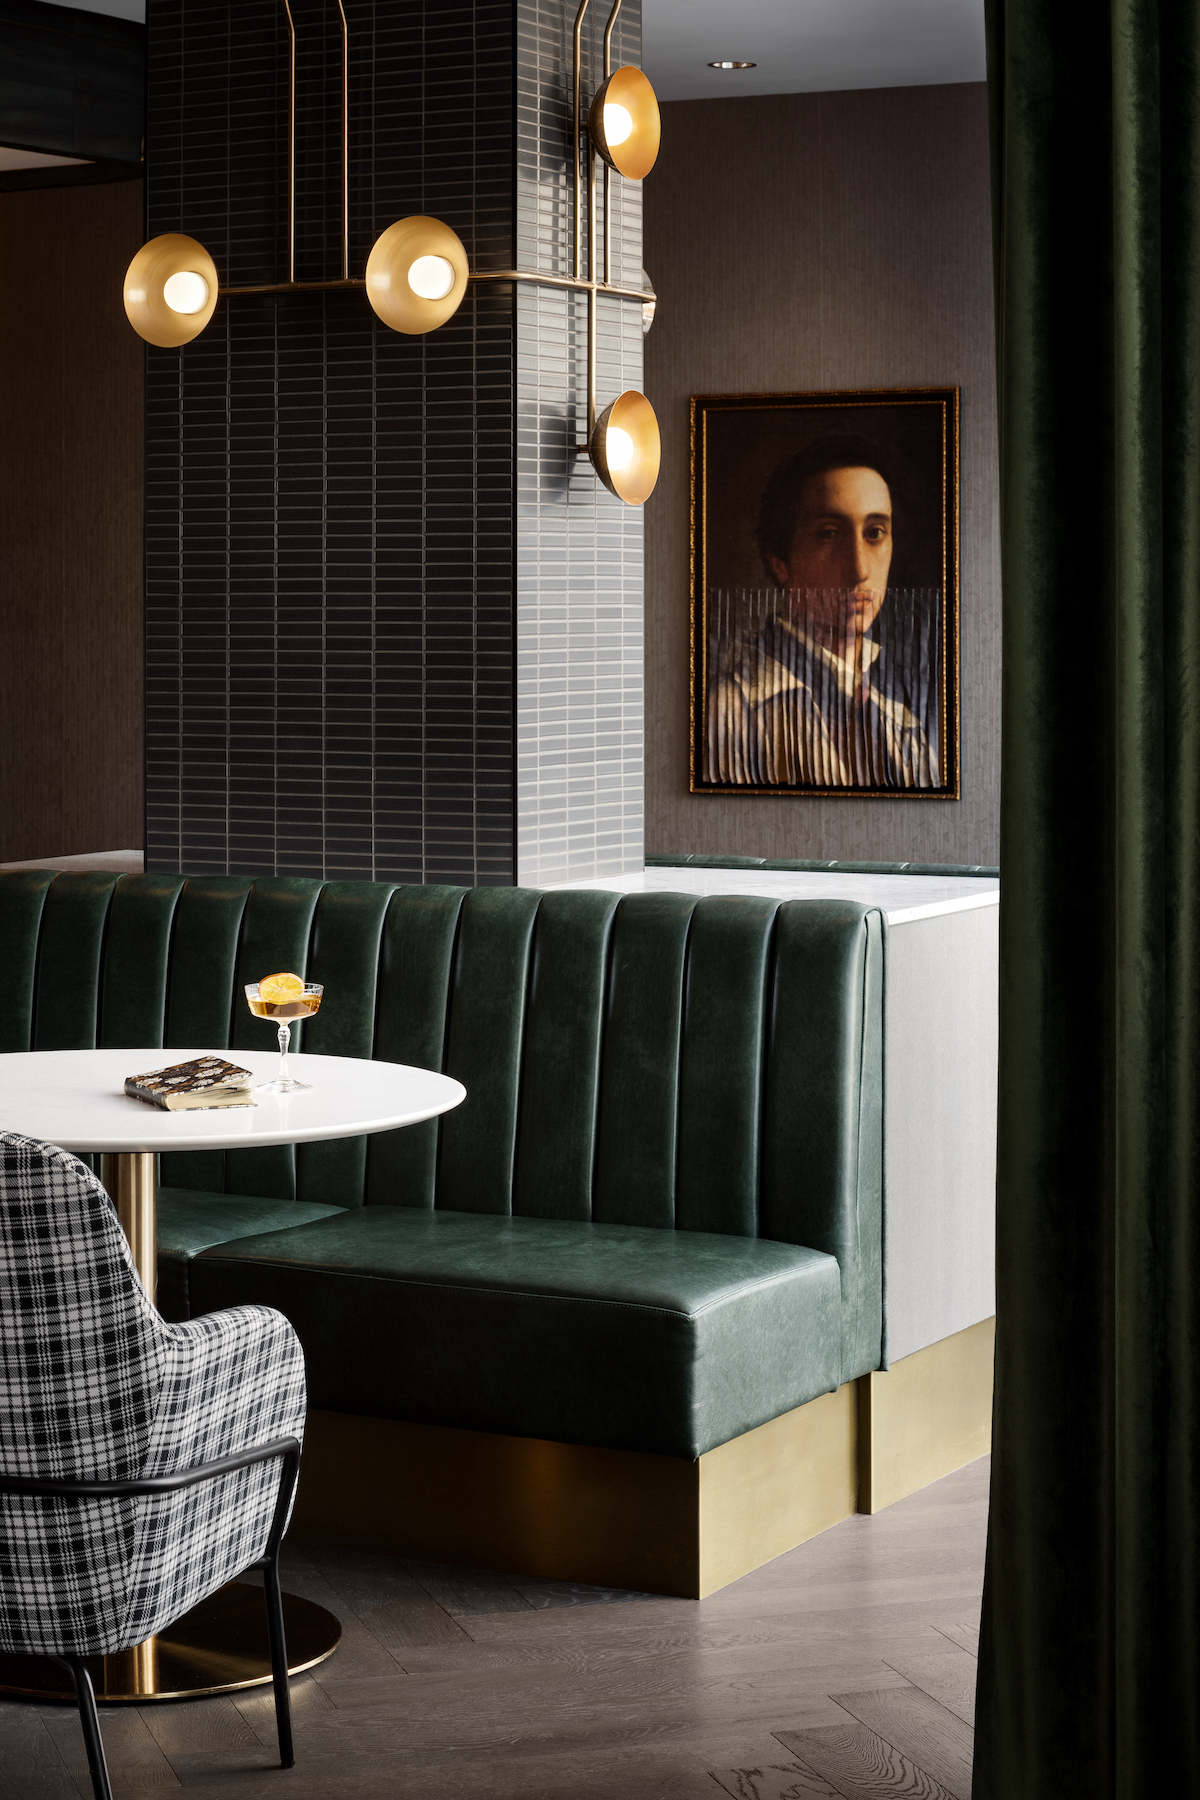 A close-up of restaurant with dark green sofa and image of man on wall as art